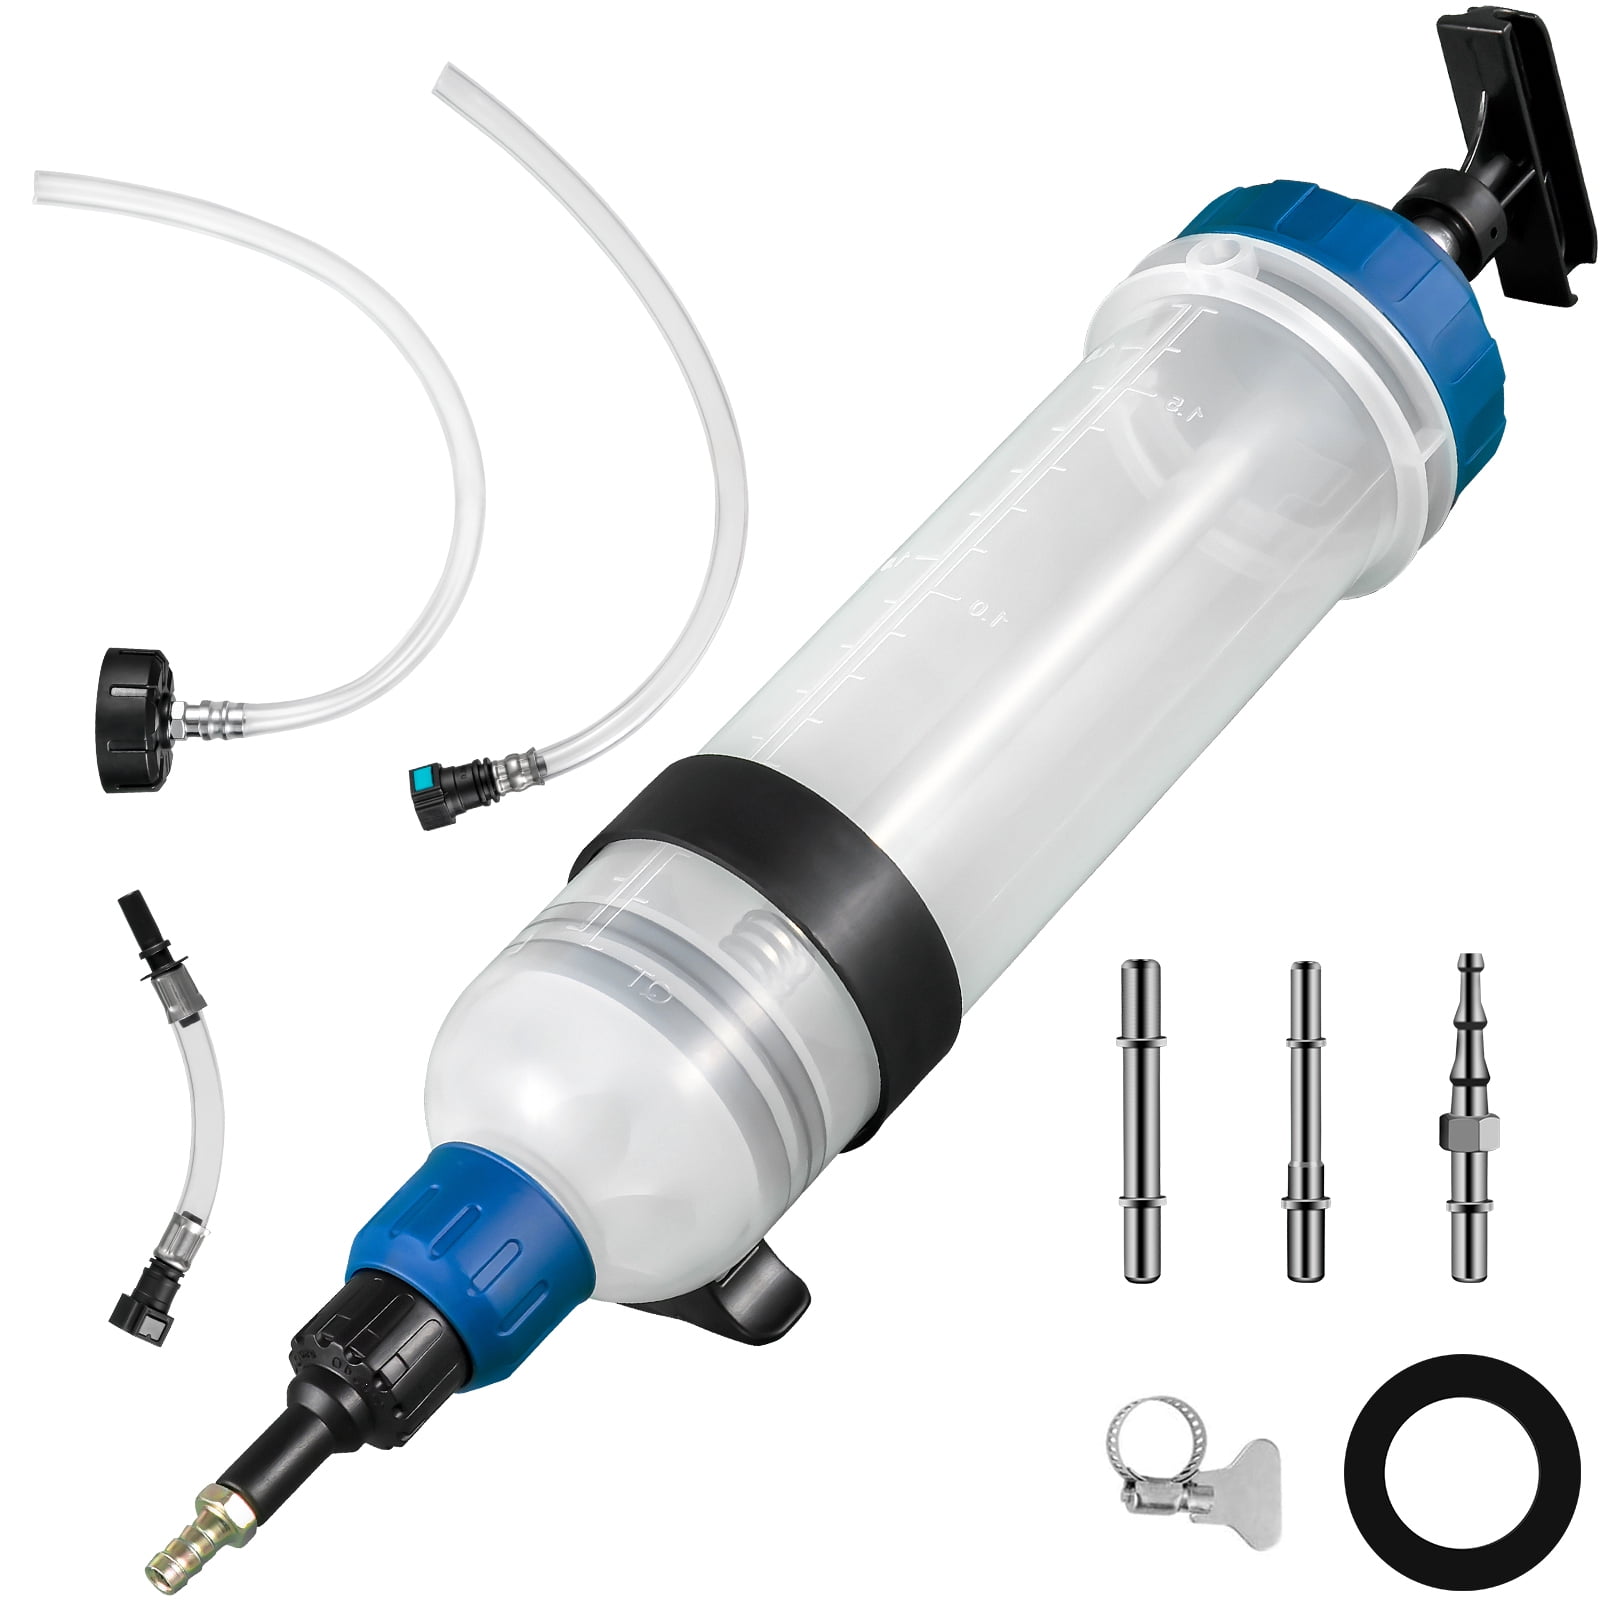  Thorstone Automotive Fluid Extractor Pump, Oil Change Syringe  with Hose, Manual Fuel Suction & Filler, Fluid Oil Change Evacuator (7  Oz./0.21 Qt./200 CC) : Automotive